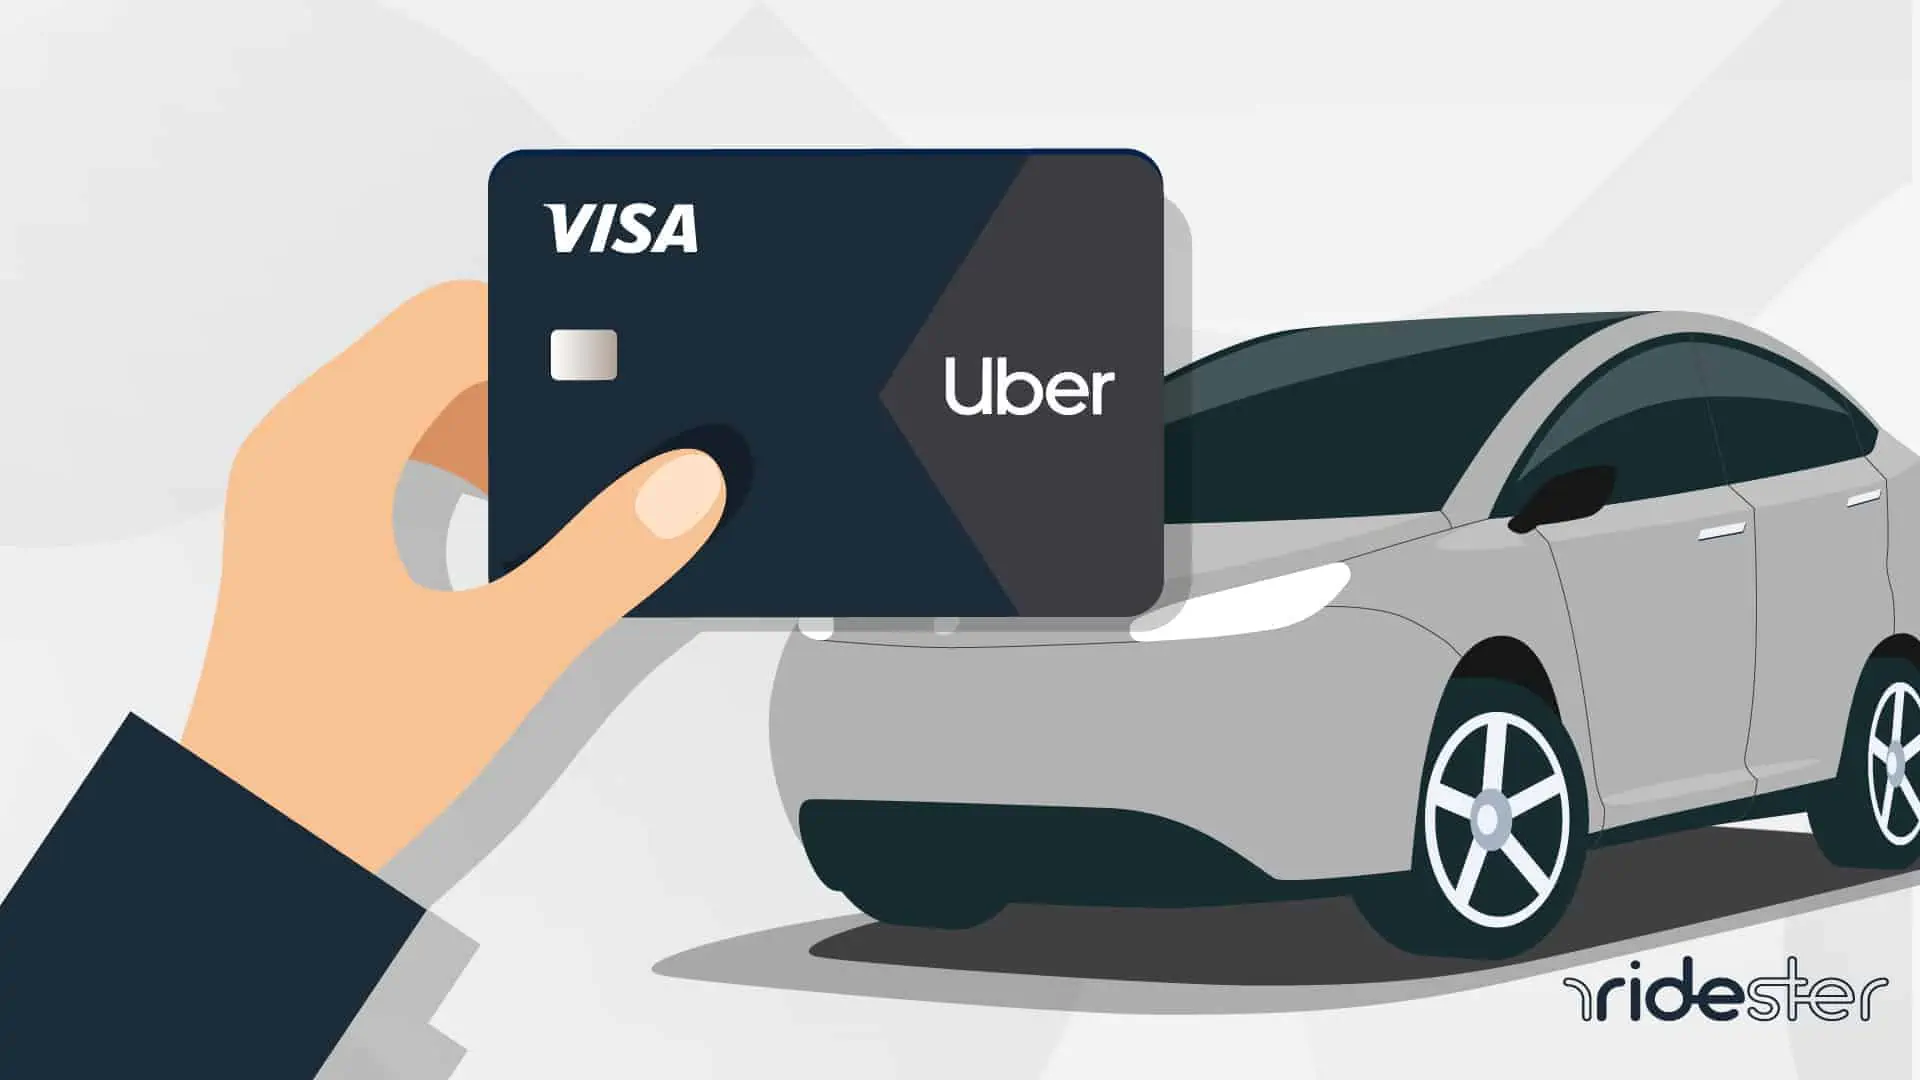 vector graphic showing a hand holding an uber plus card in front of a tesla rideshare vehicle